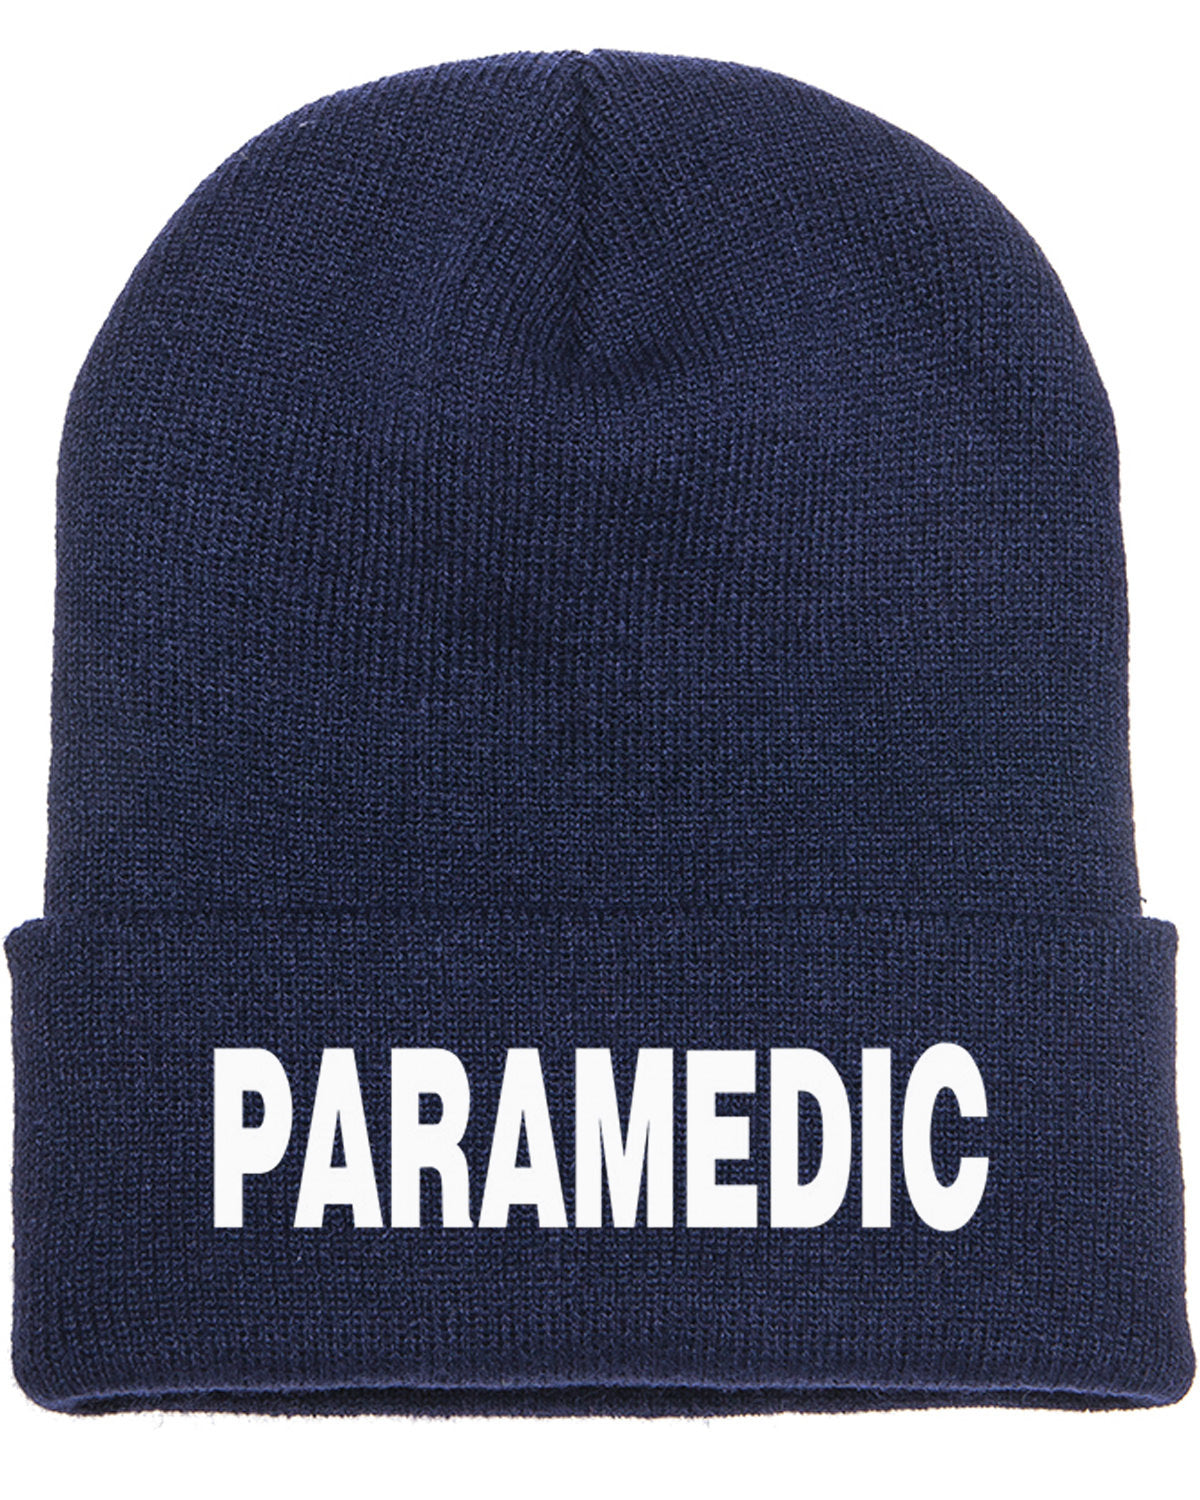 Paramedic - Cuffed Toque, Lined